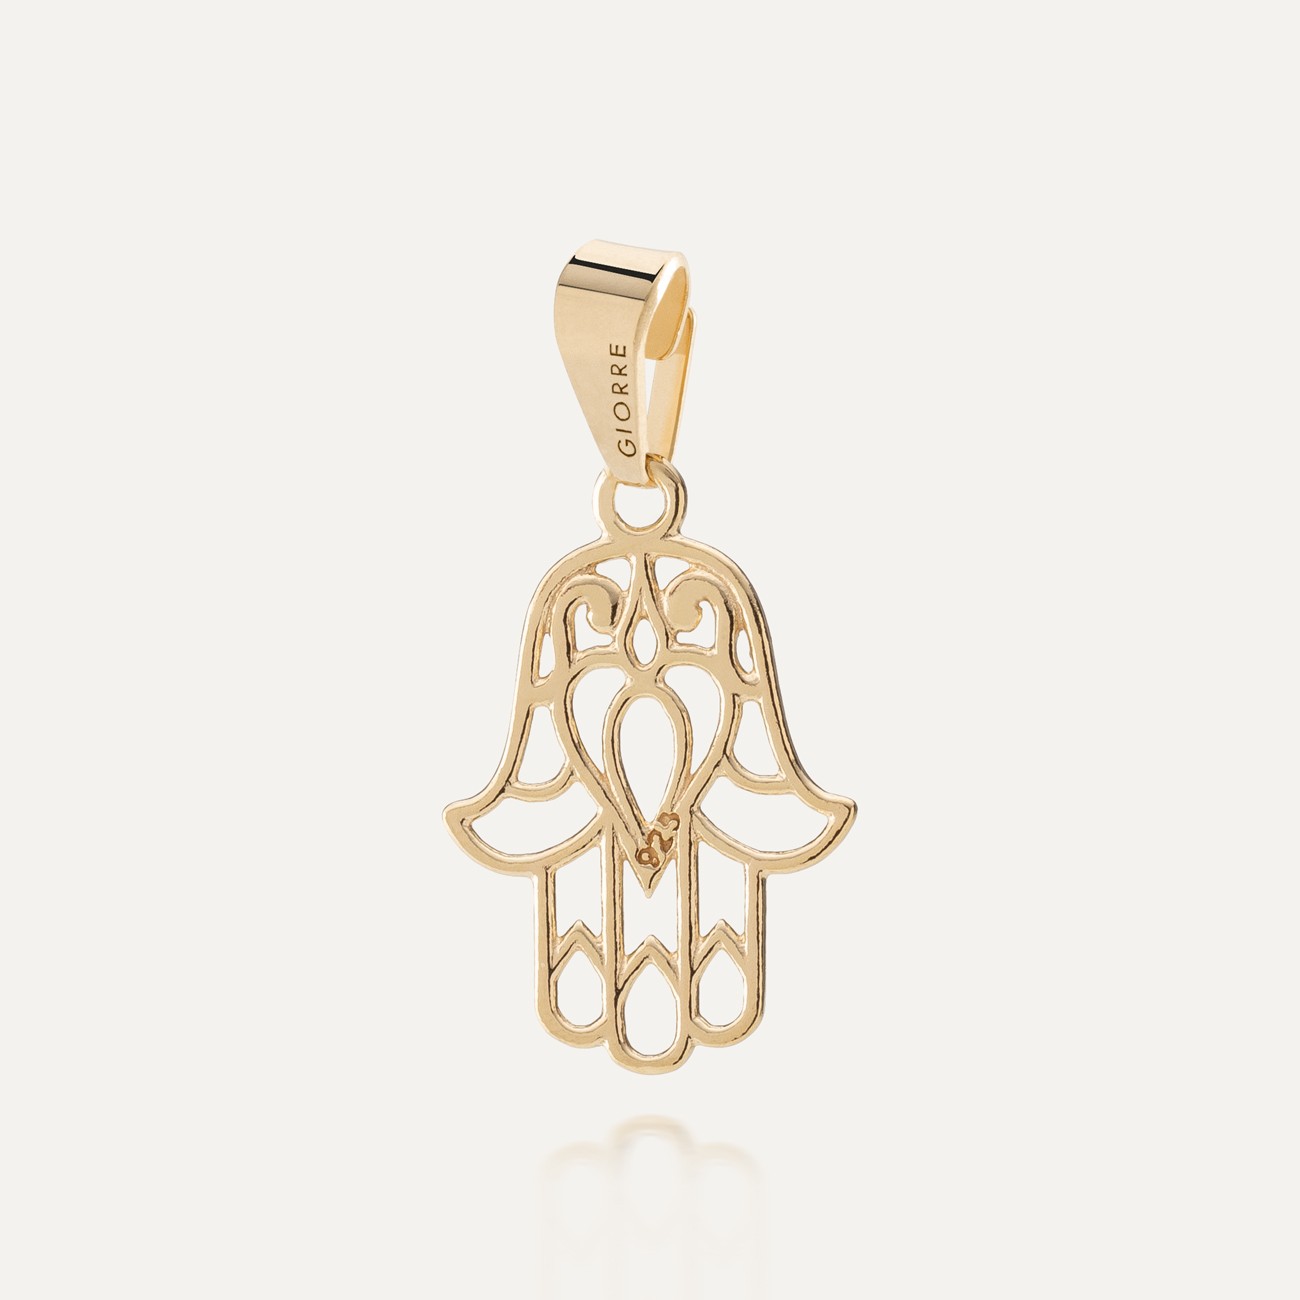 CHARM 140, HAMSA, STERLING SILVER (925) RHODIUM OR GOLD PLATED